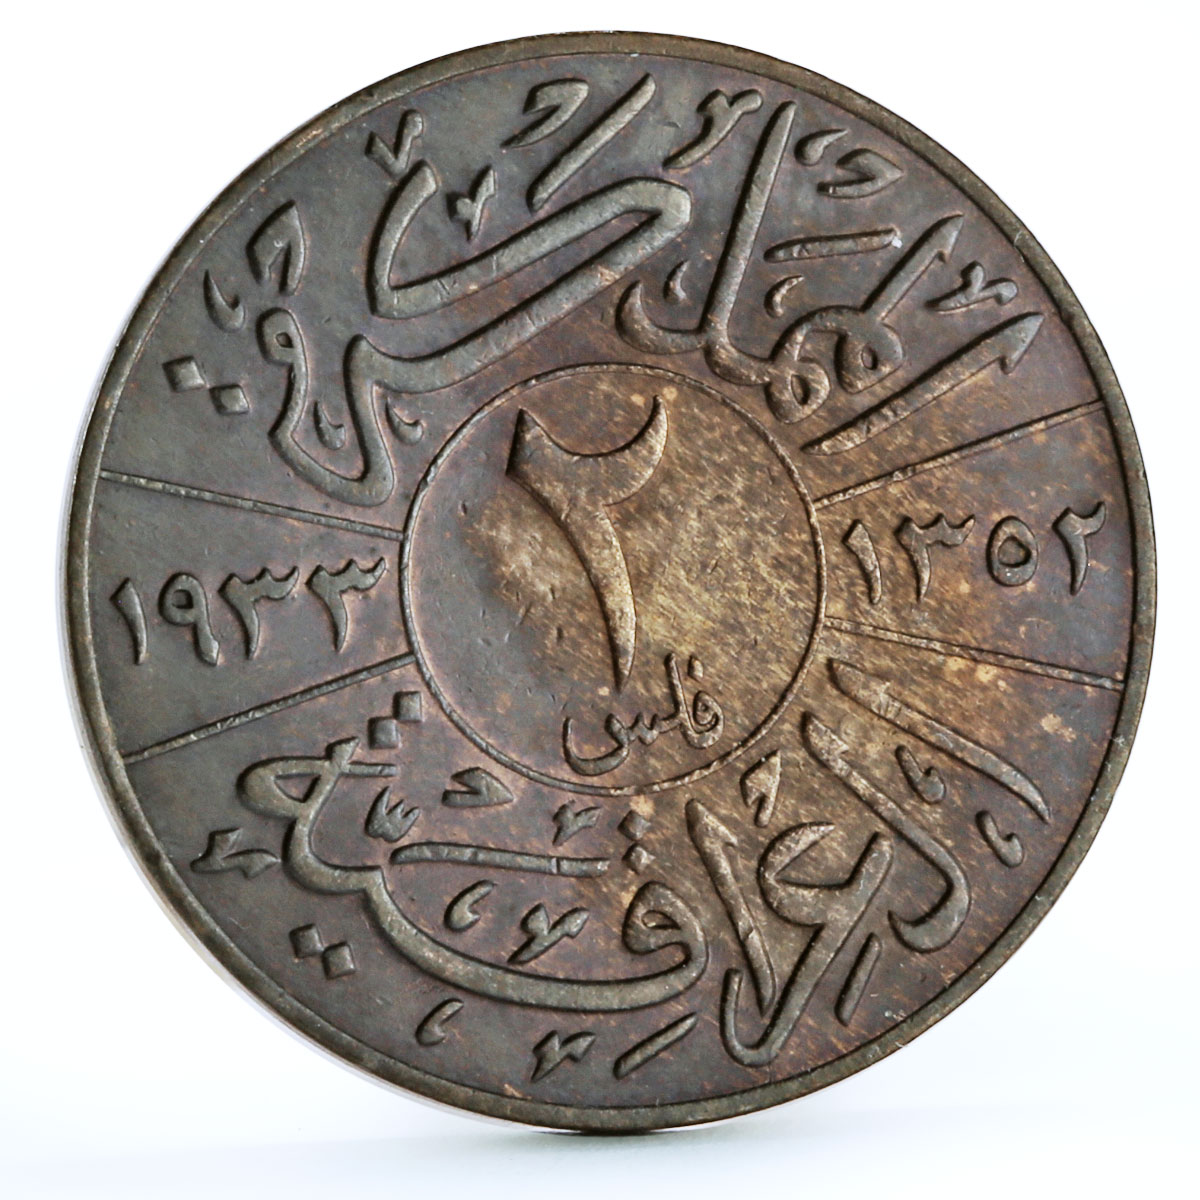 Iraq 2 fils State Coinage King Faisal I Coat of Arms bronze coin 1933